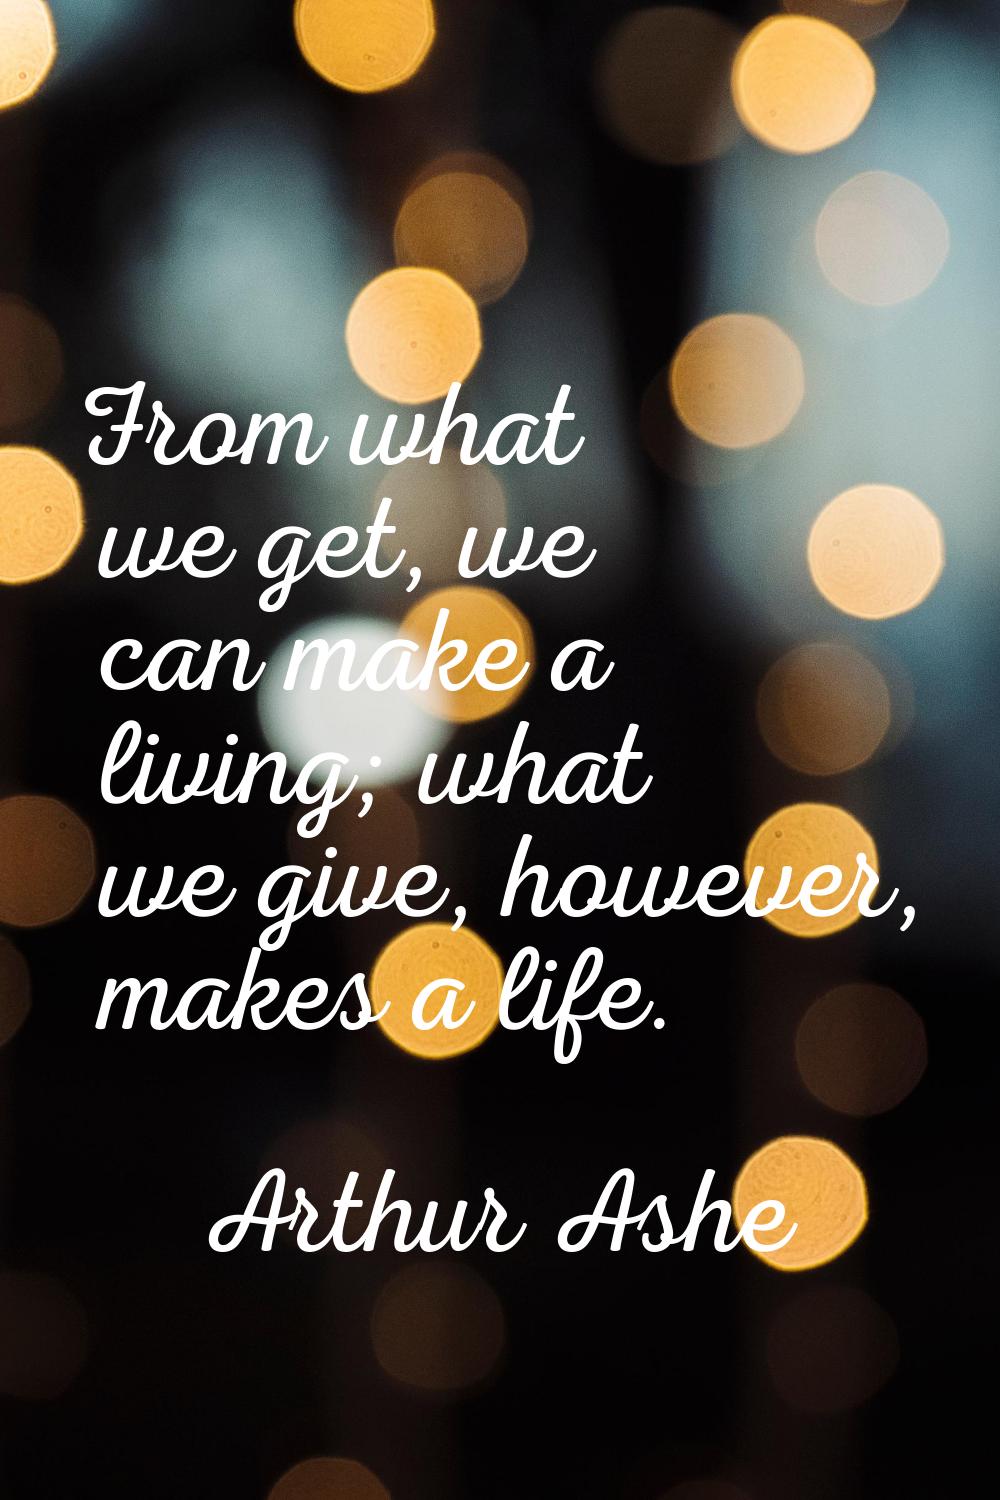 From what we get, we can make a living; what we give, however, makes a life.